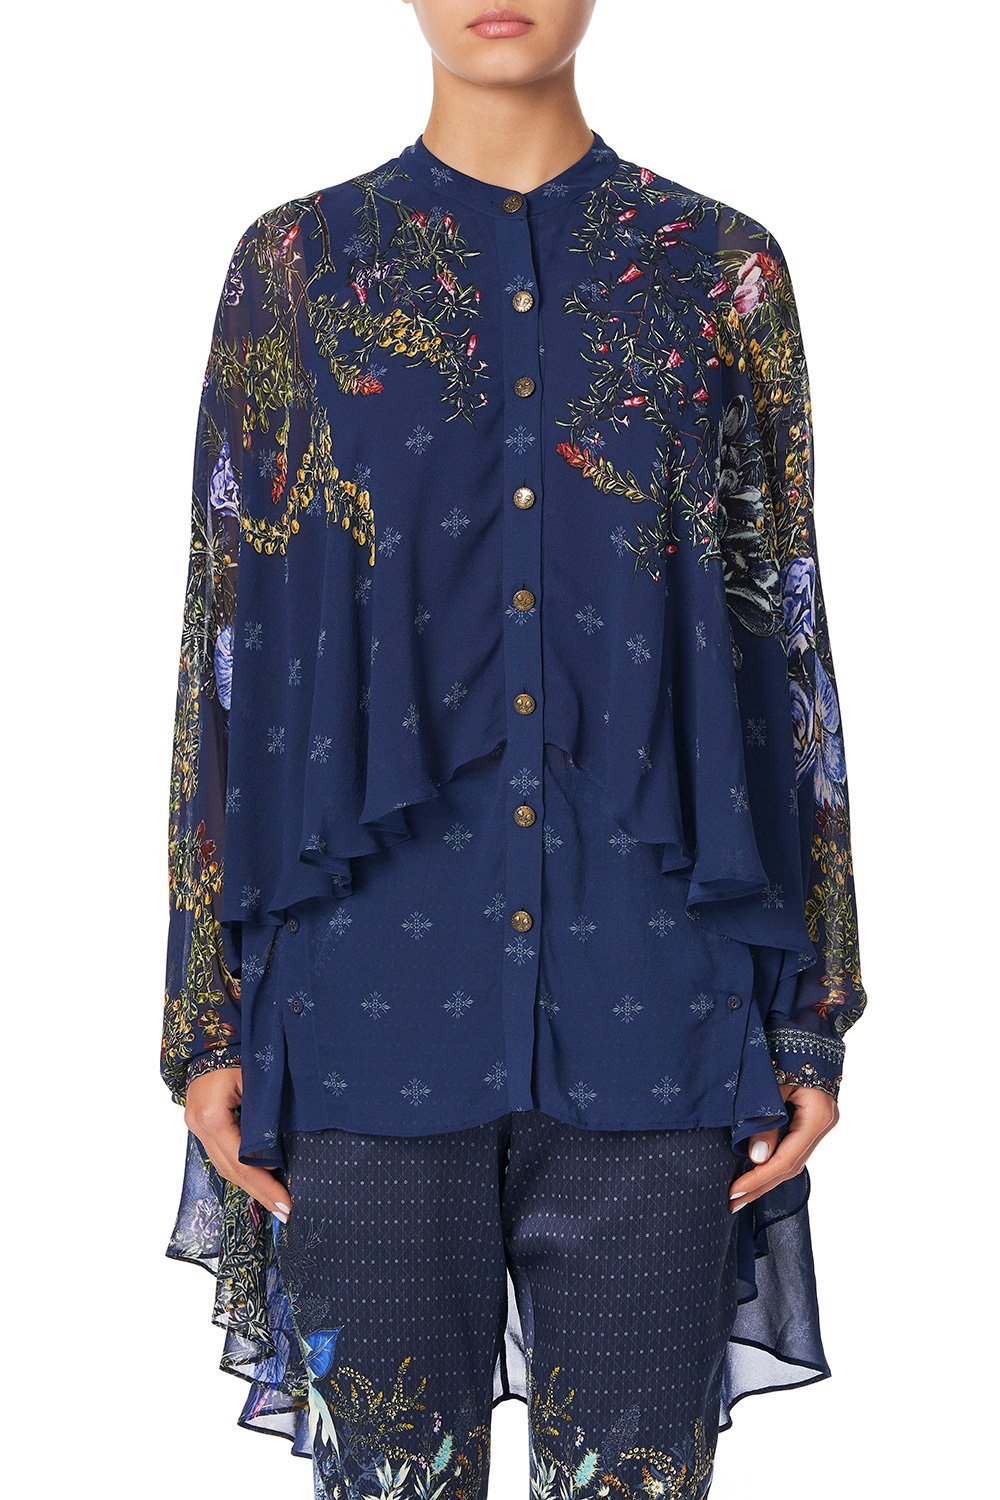 DRAPED BUTTON FRONT BLOUSE SOUTHERN TWILIGHT